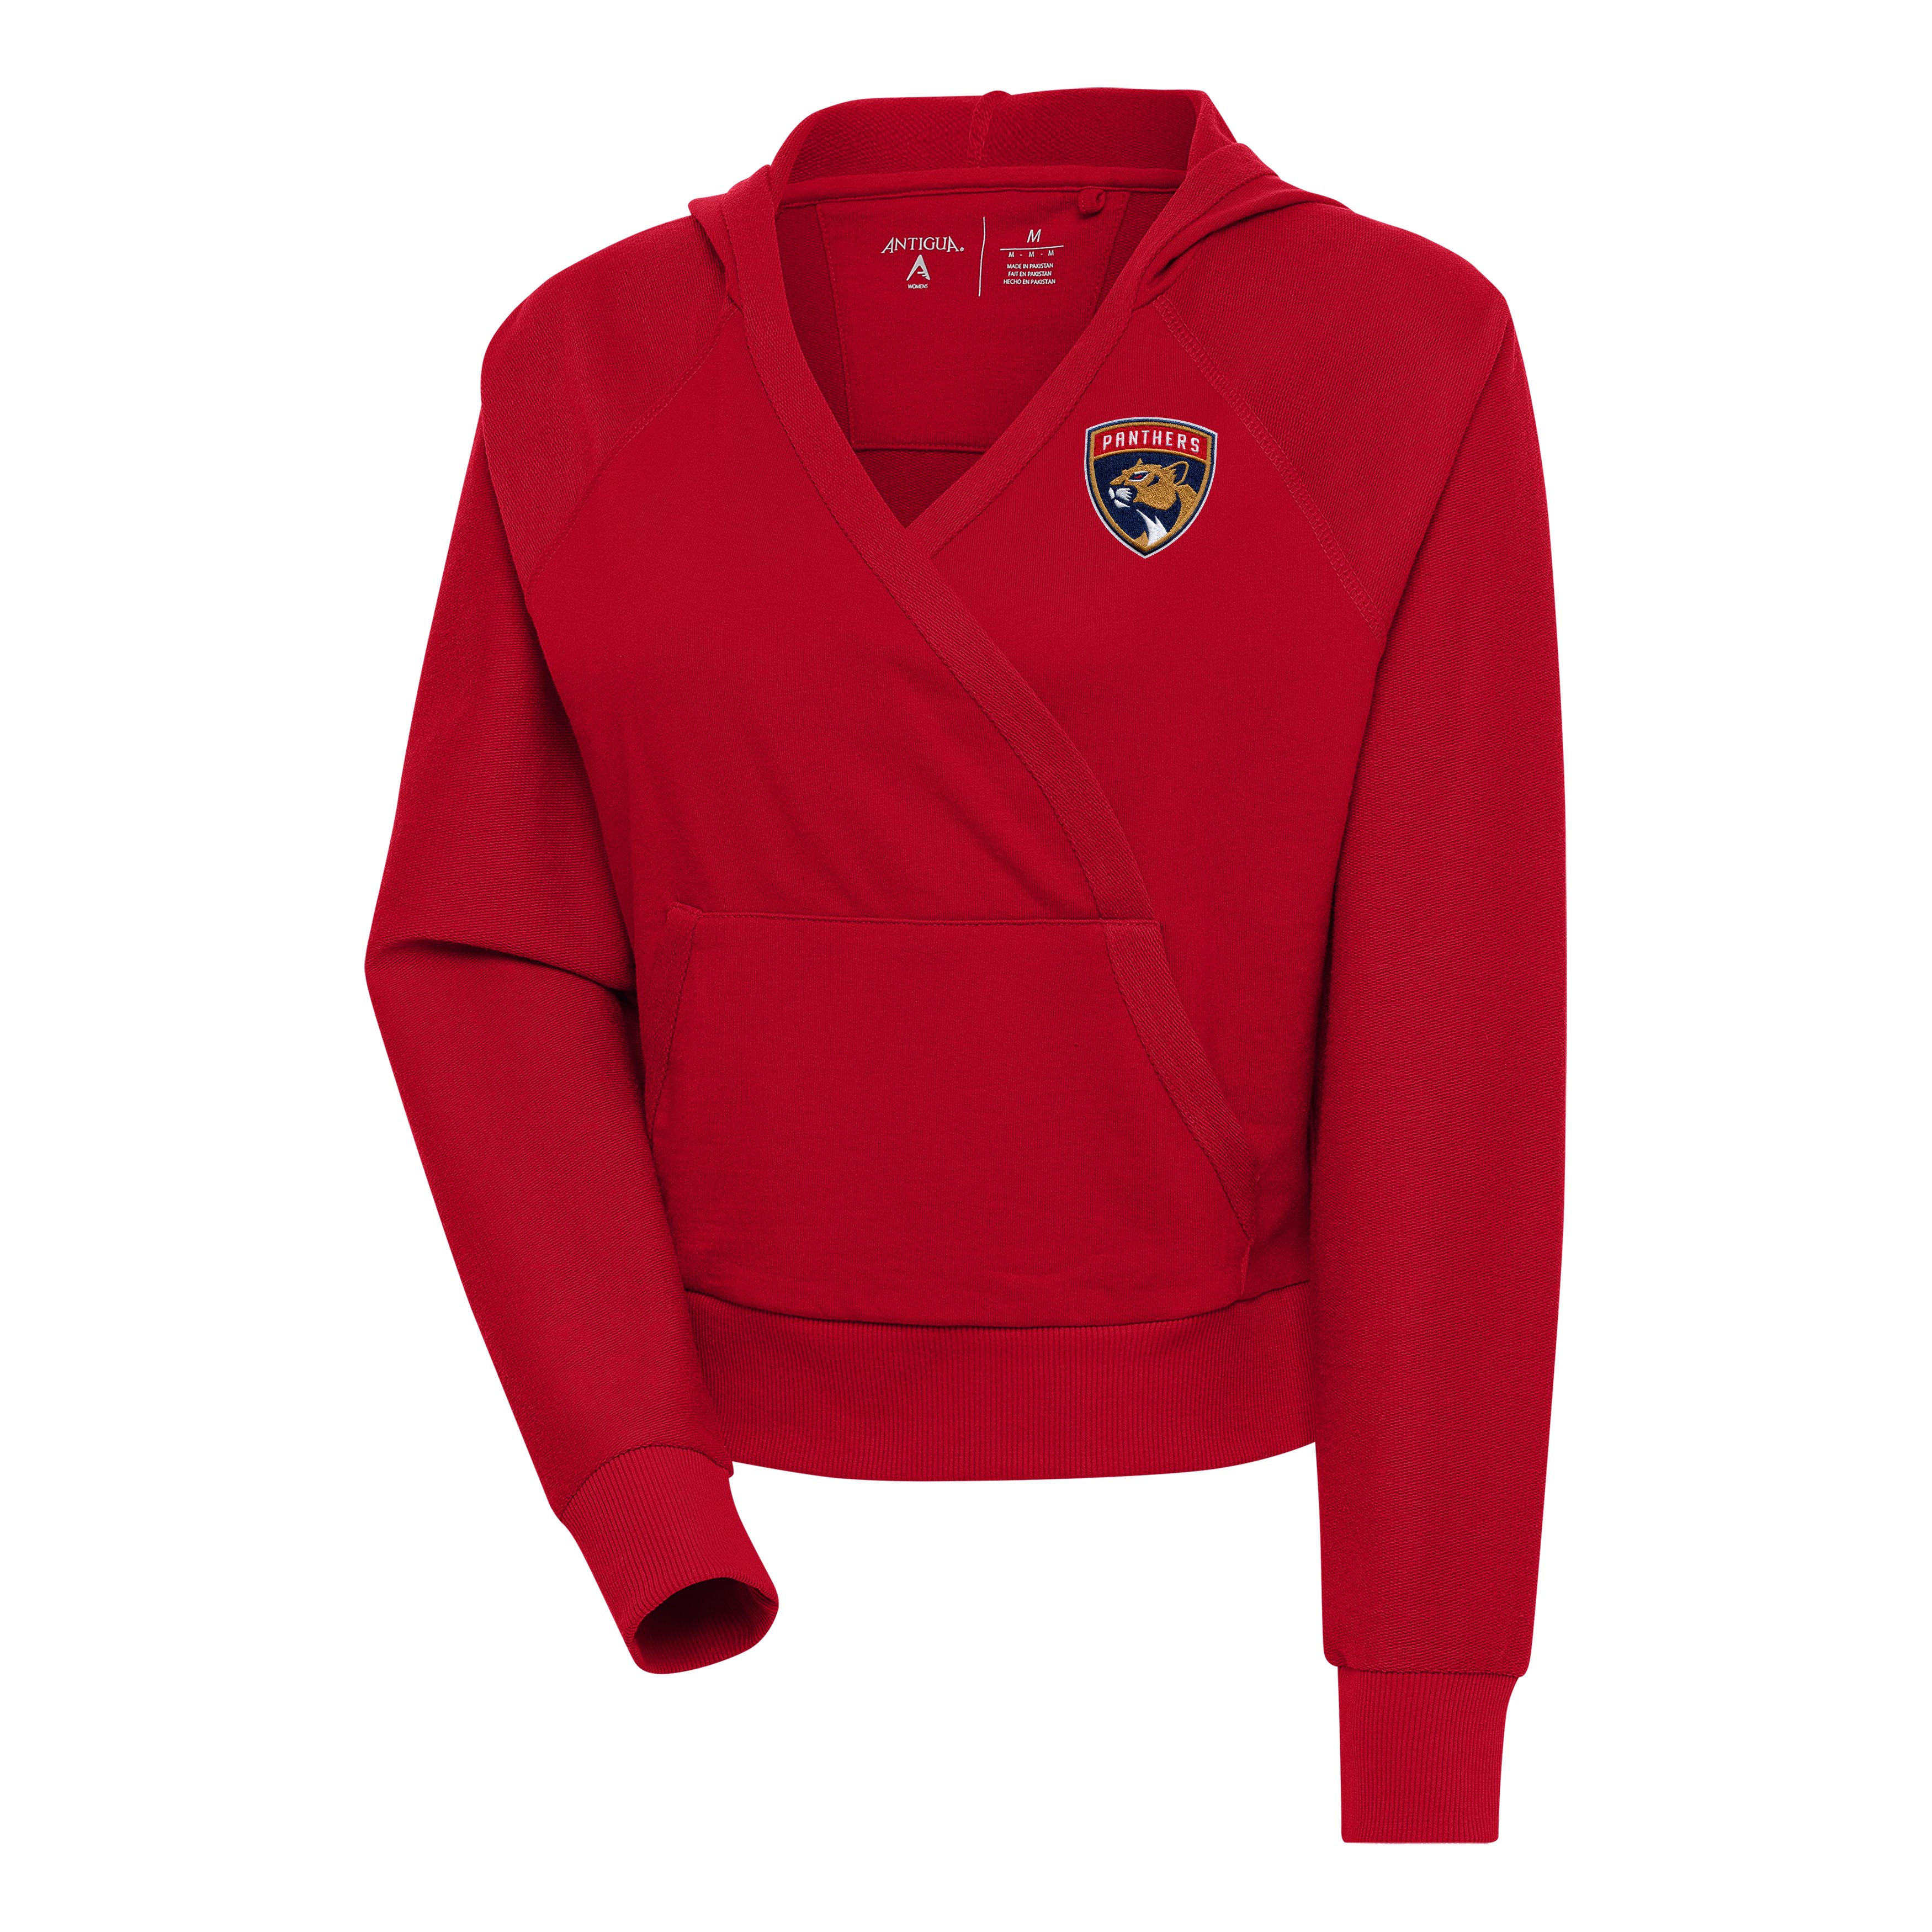 Florida Panthers Antigua Women's Point L/S Hooded Sweatshirt - Red